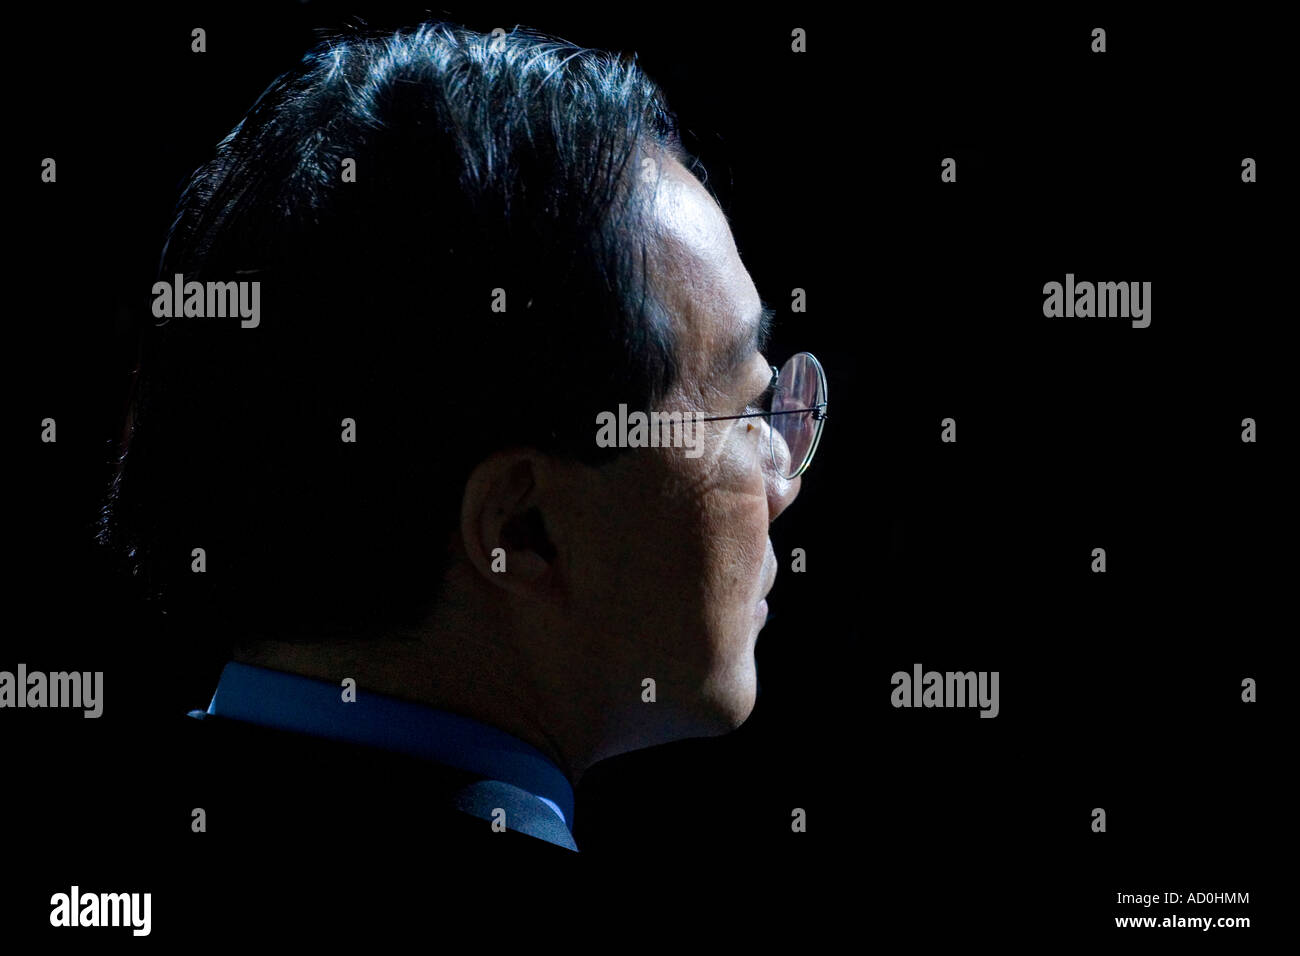 Cellist Yo-Yo Ma performing at the Nobel Peace Prize Concert in Oslo on December 11, 2005. Stock Photo